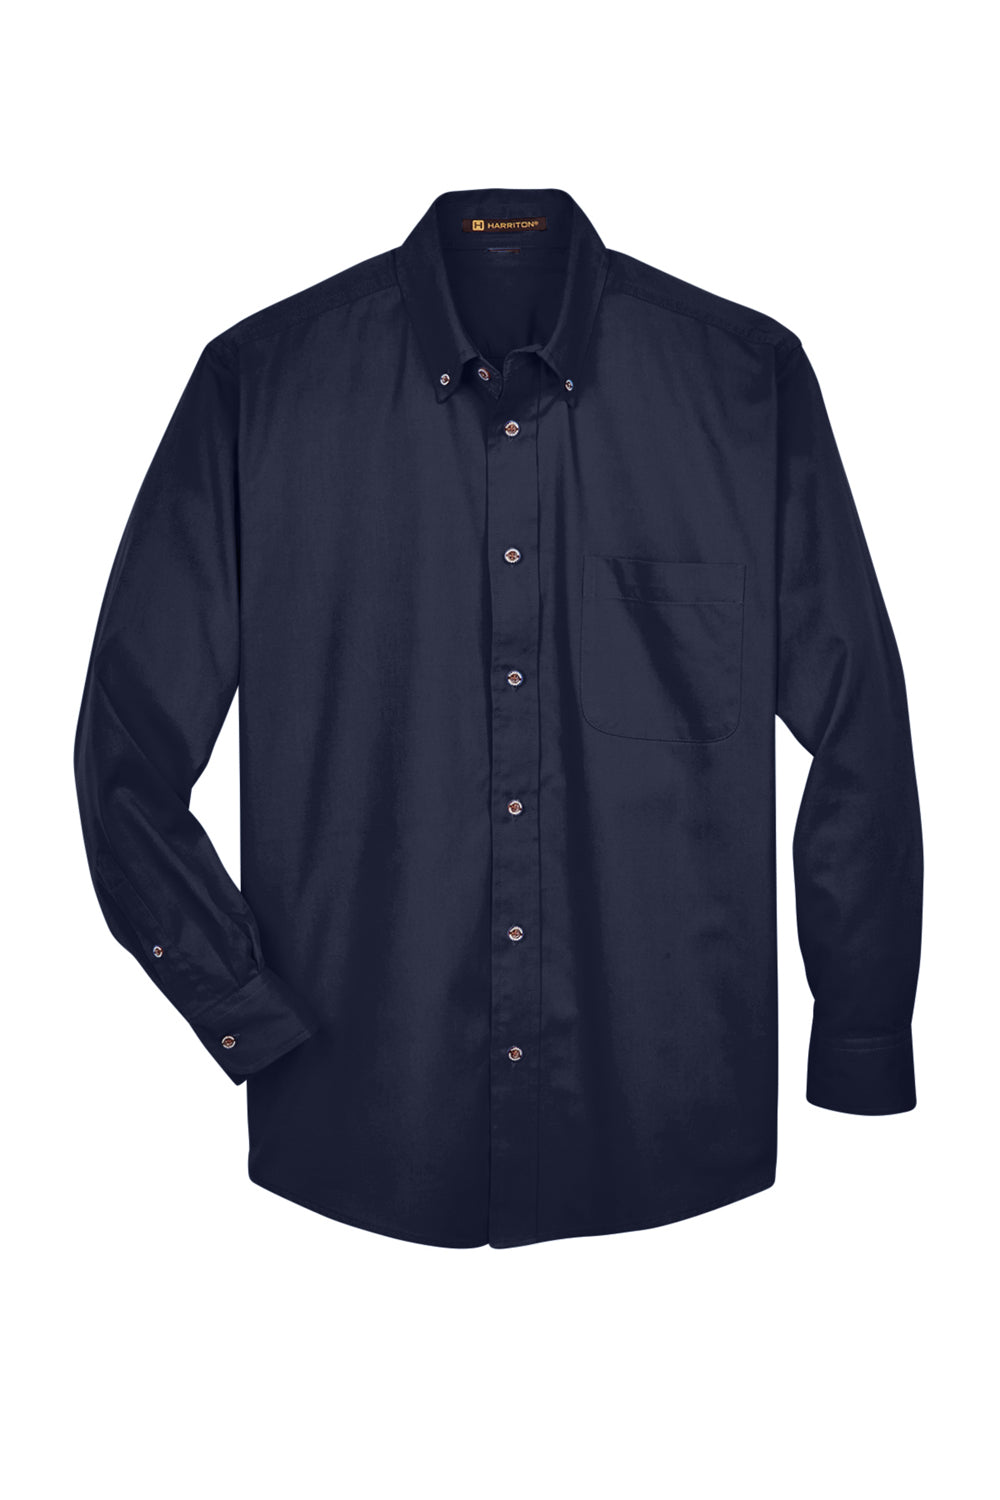 Harriton M500/M500T Wrinkle Resistant Long Sleeve Button Down Shirt w/ Pocket Navy Blue Flat Front